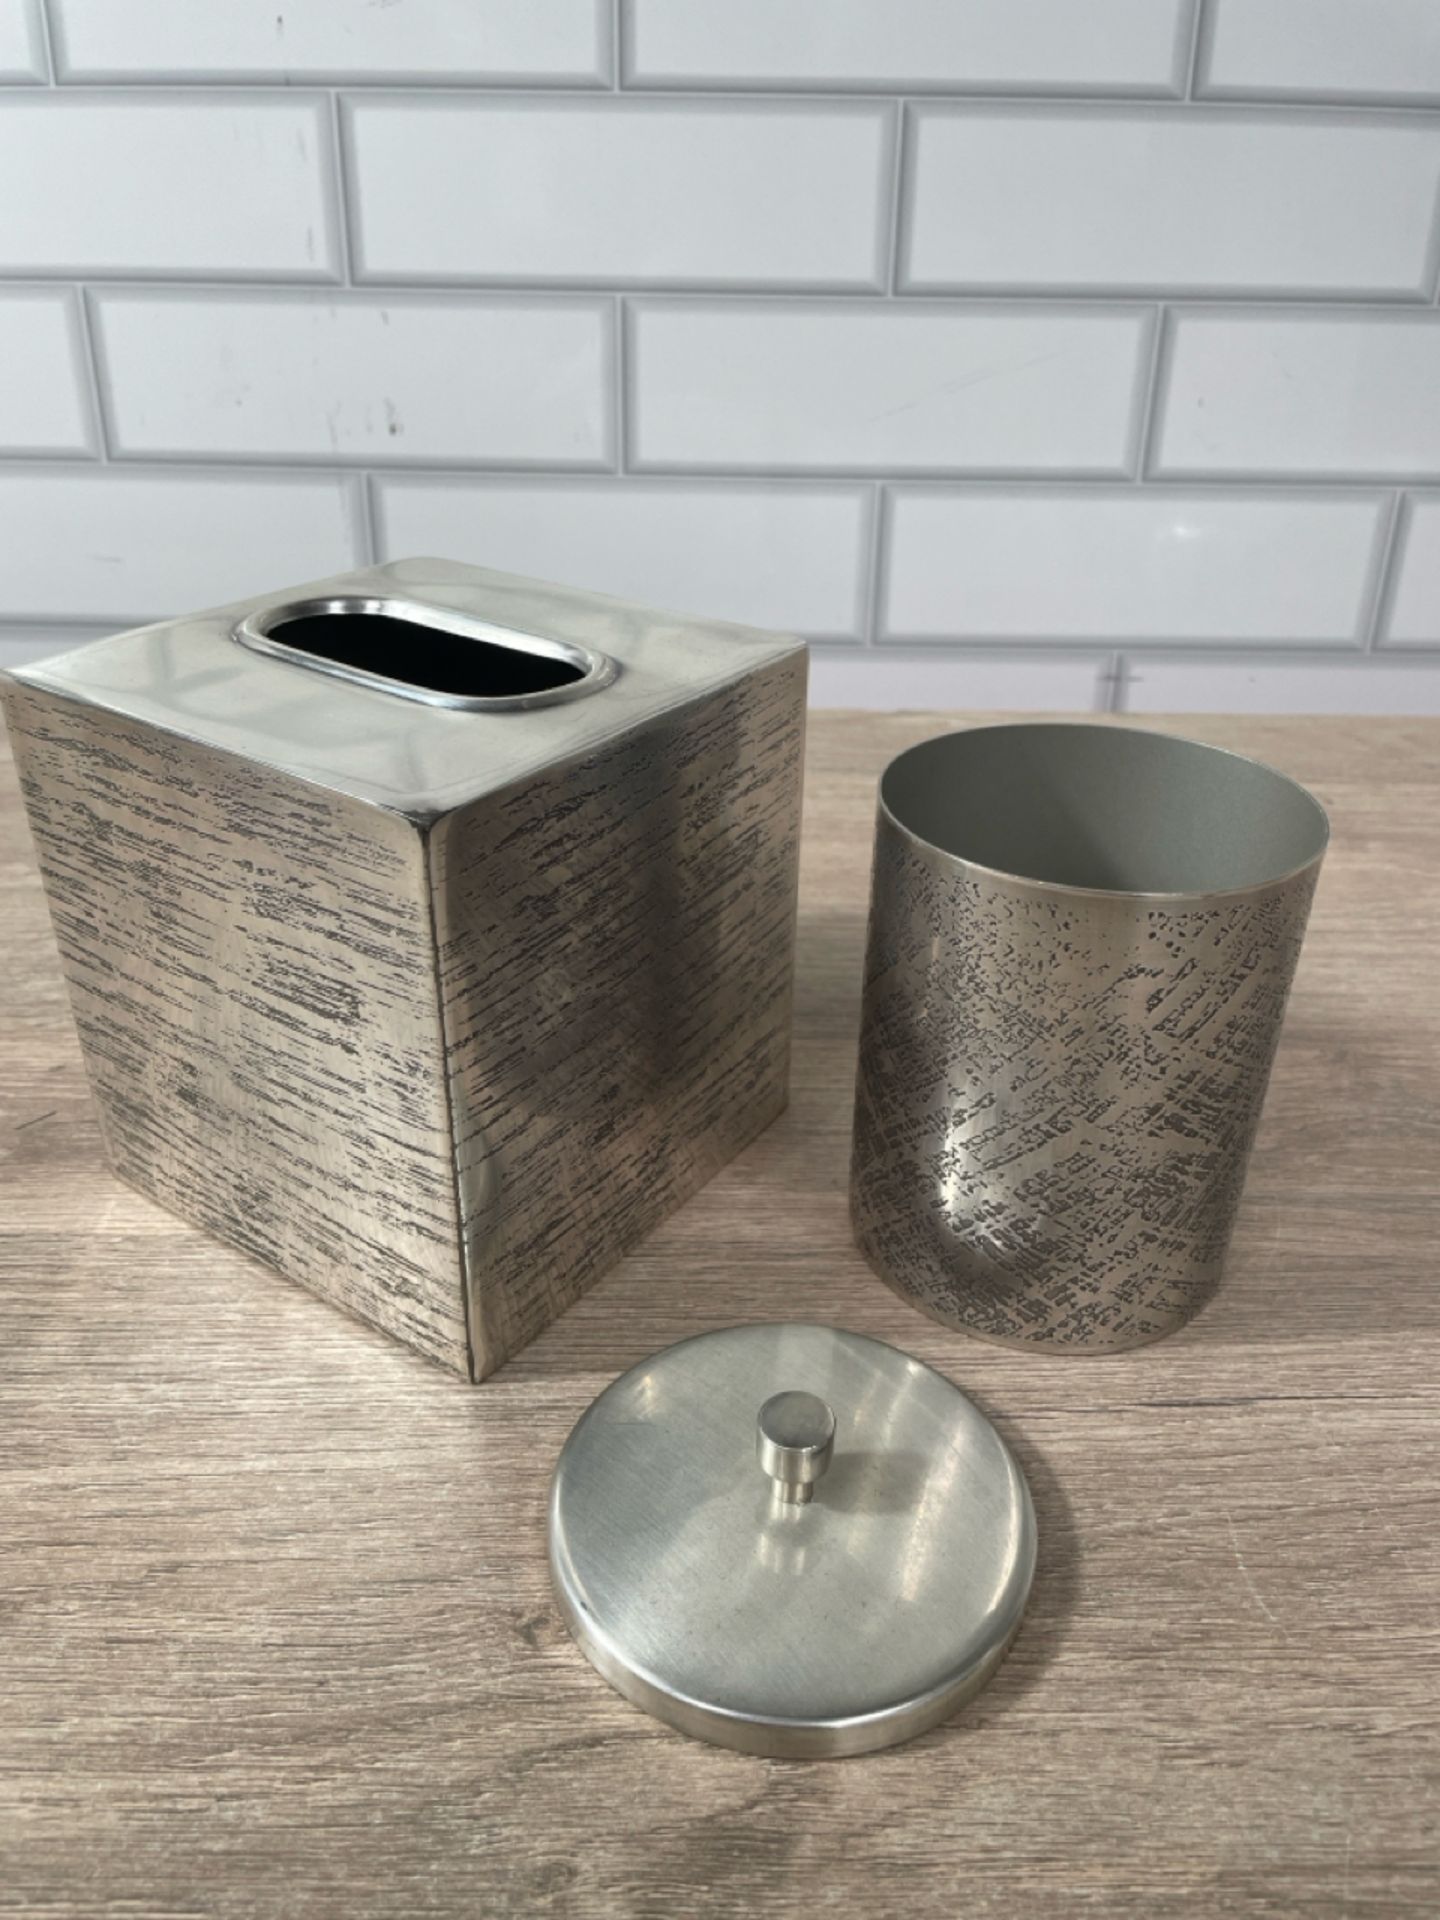 Etched Steel Bathroom Accessories - Image 3 of 4